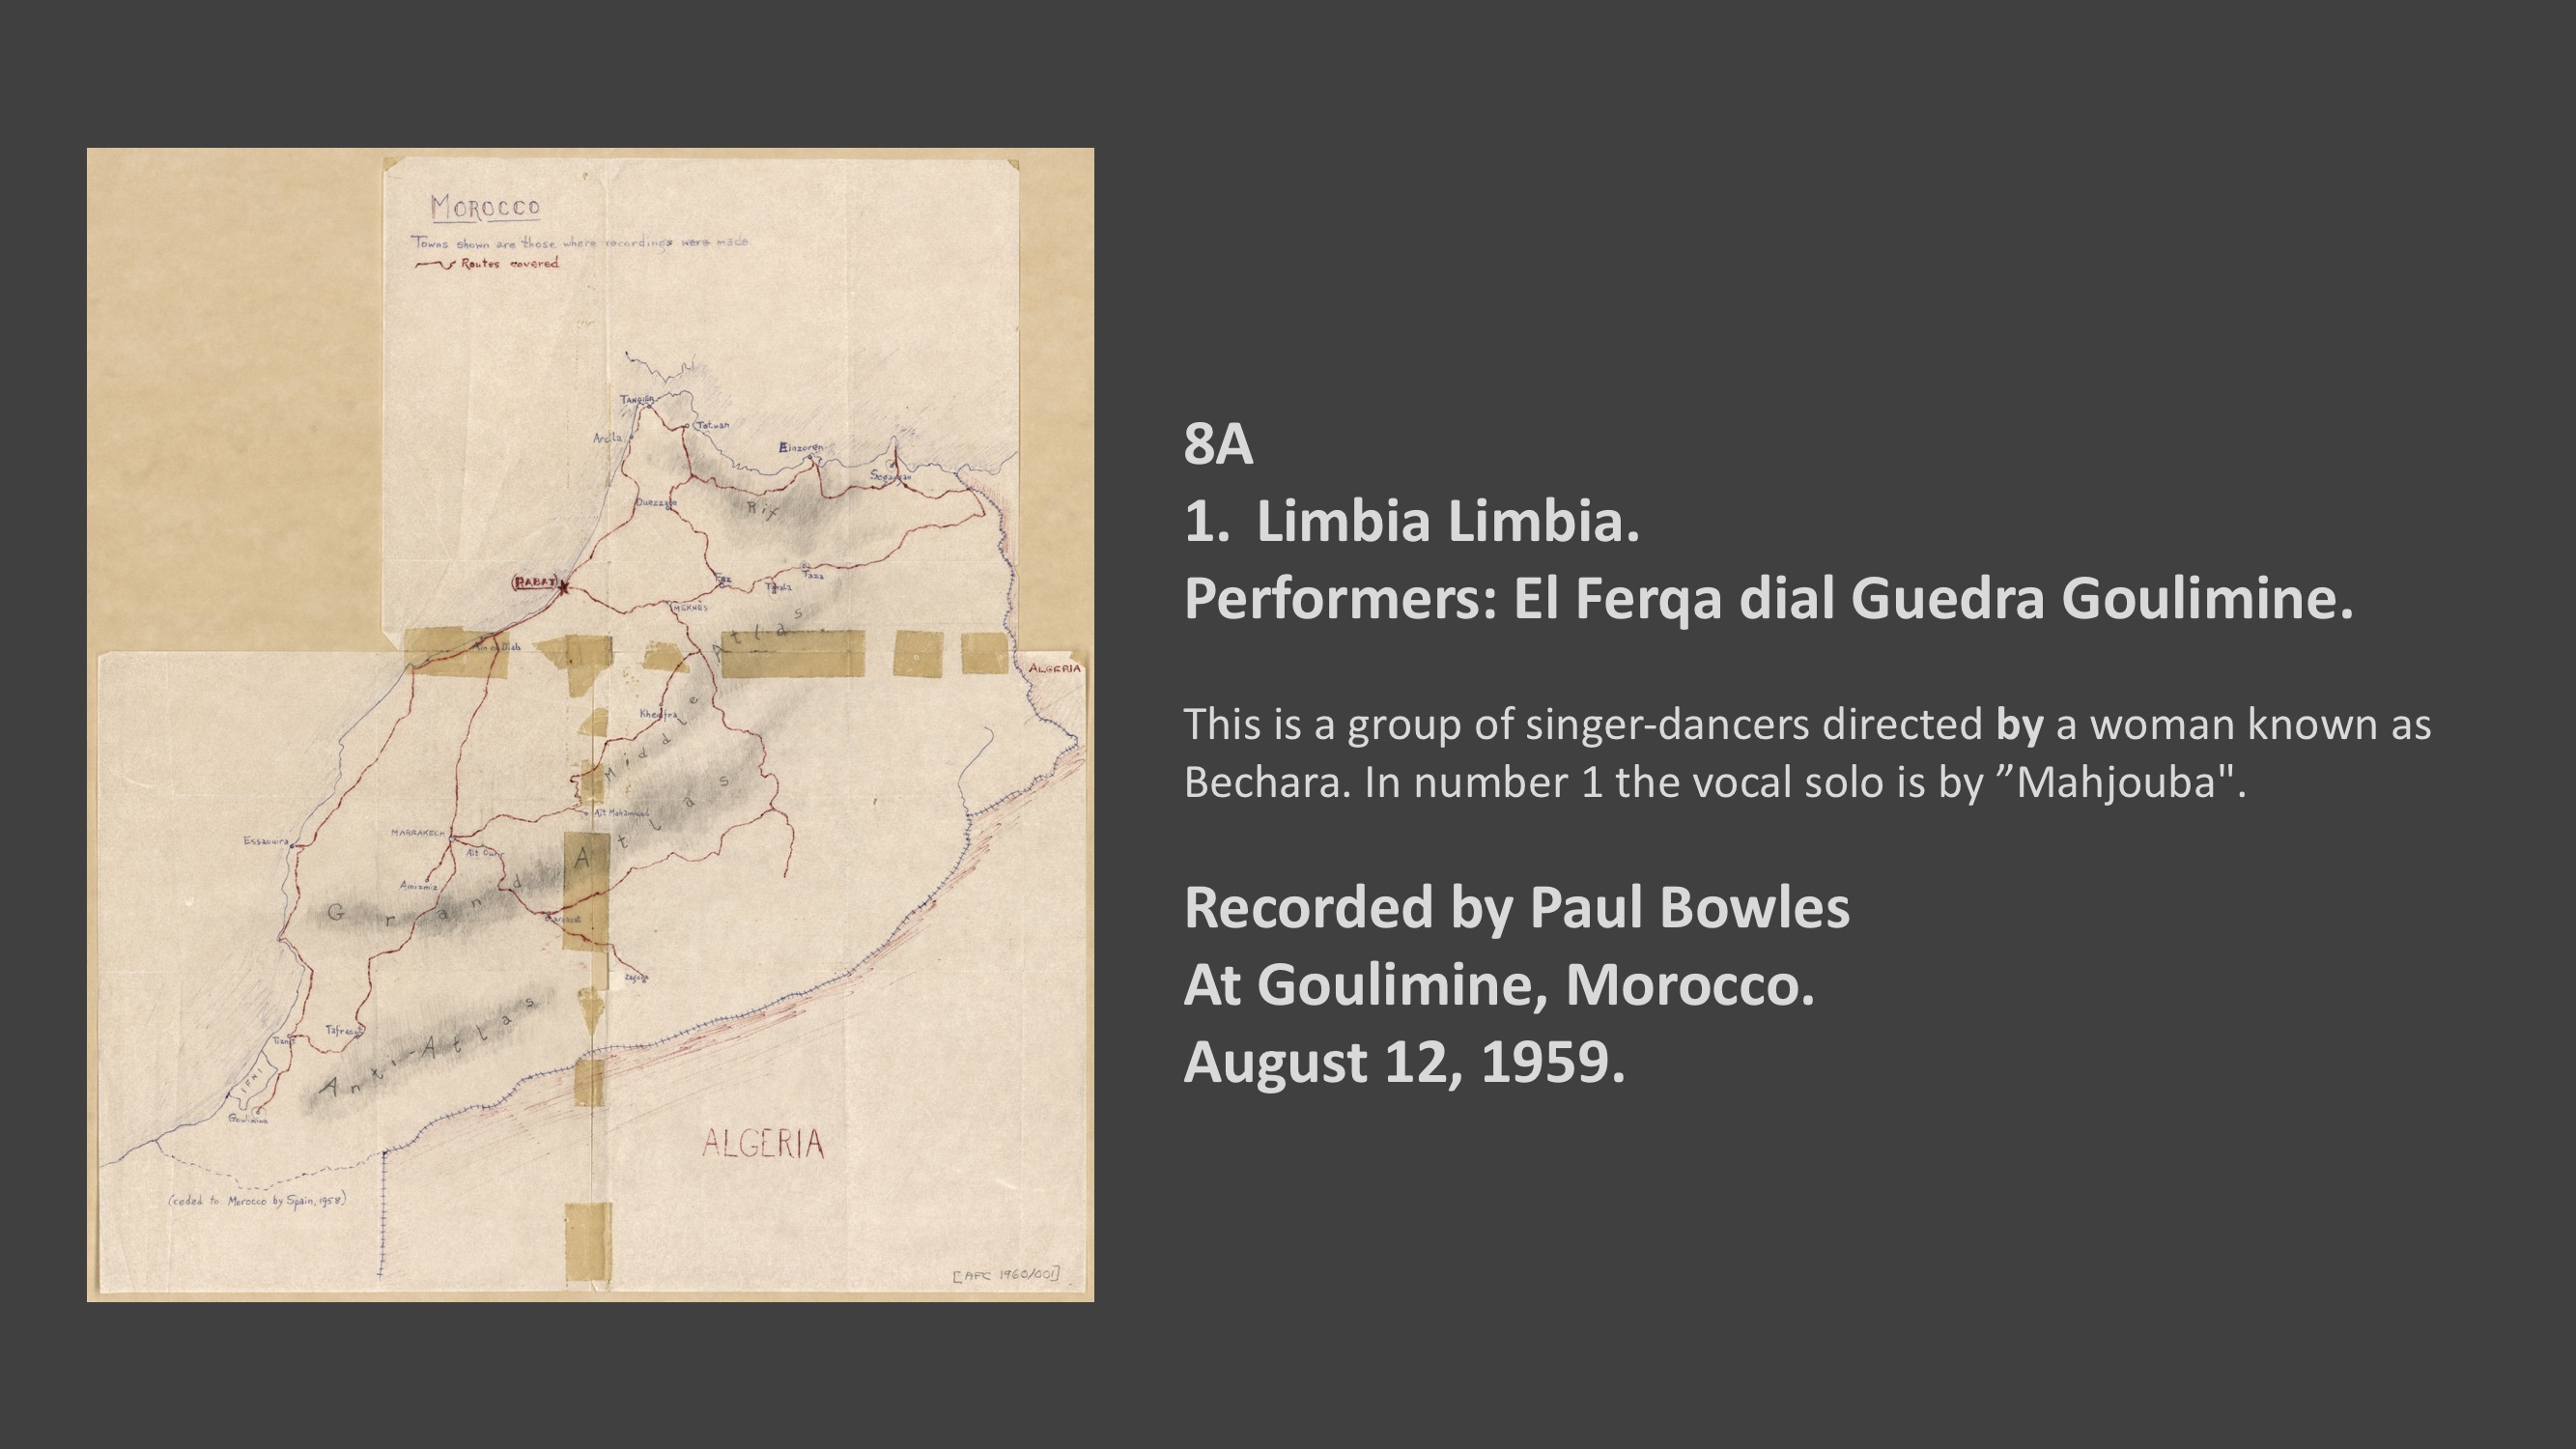 El Ferqa dial Guedra  - 8A 
Limbia Limbia.
Performers: El Ferqa dial Guedra Goulimine. 

Recorded by Paul Bowles at Goulimine, Moroccan Sahara.
August 12, 1959
